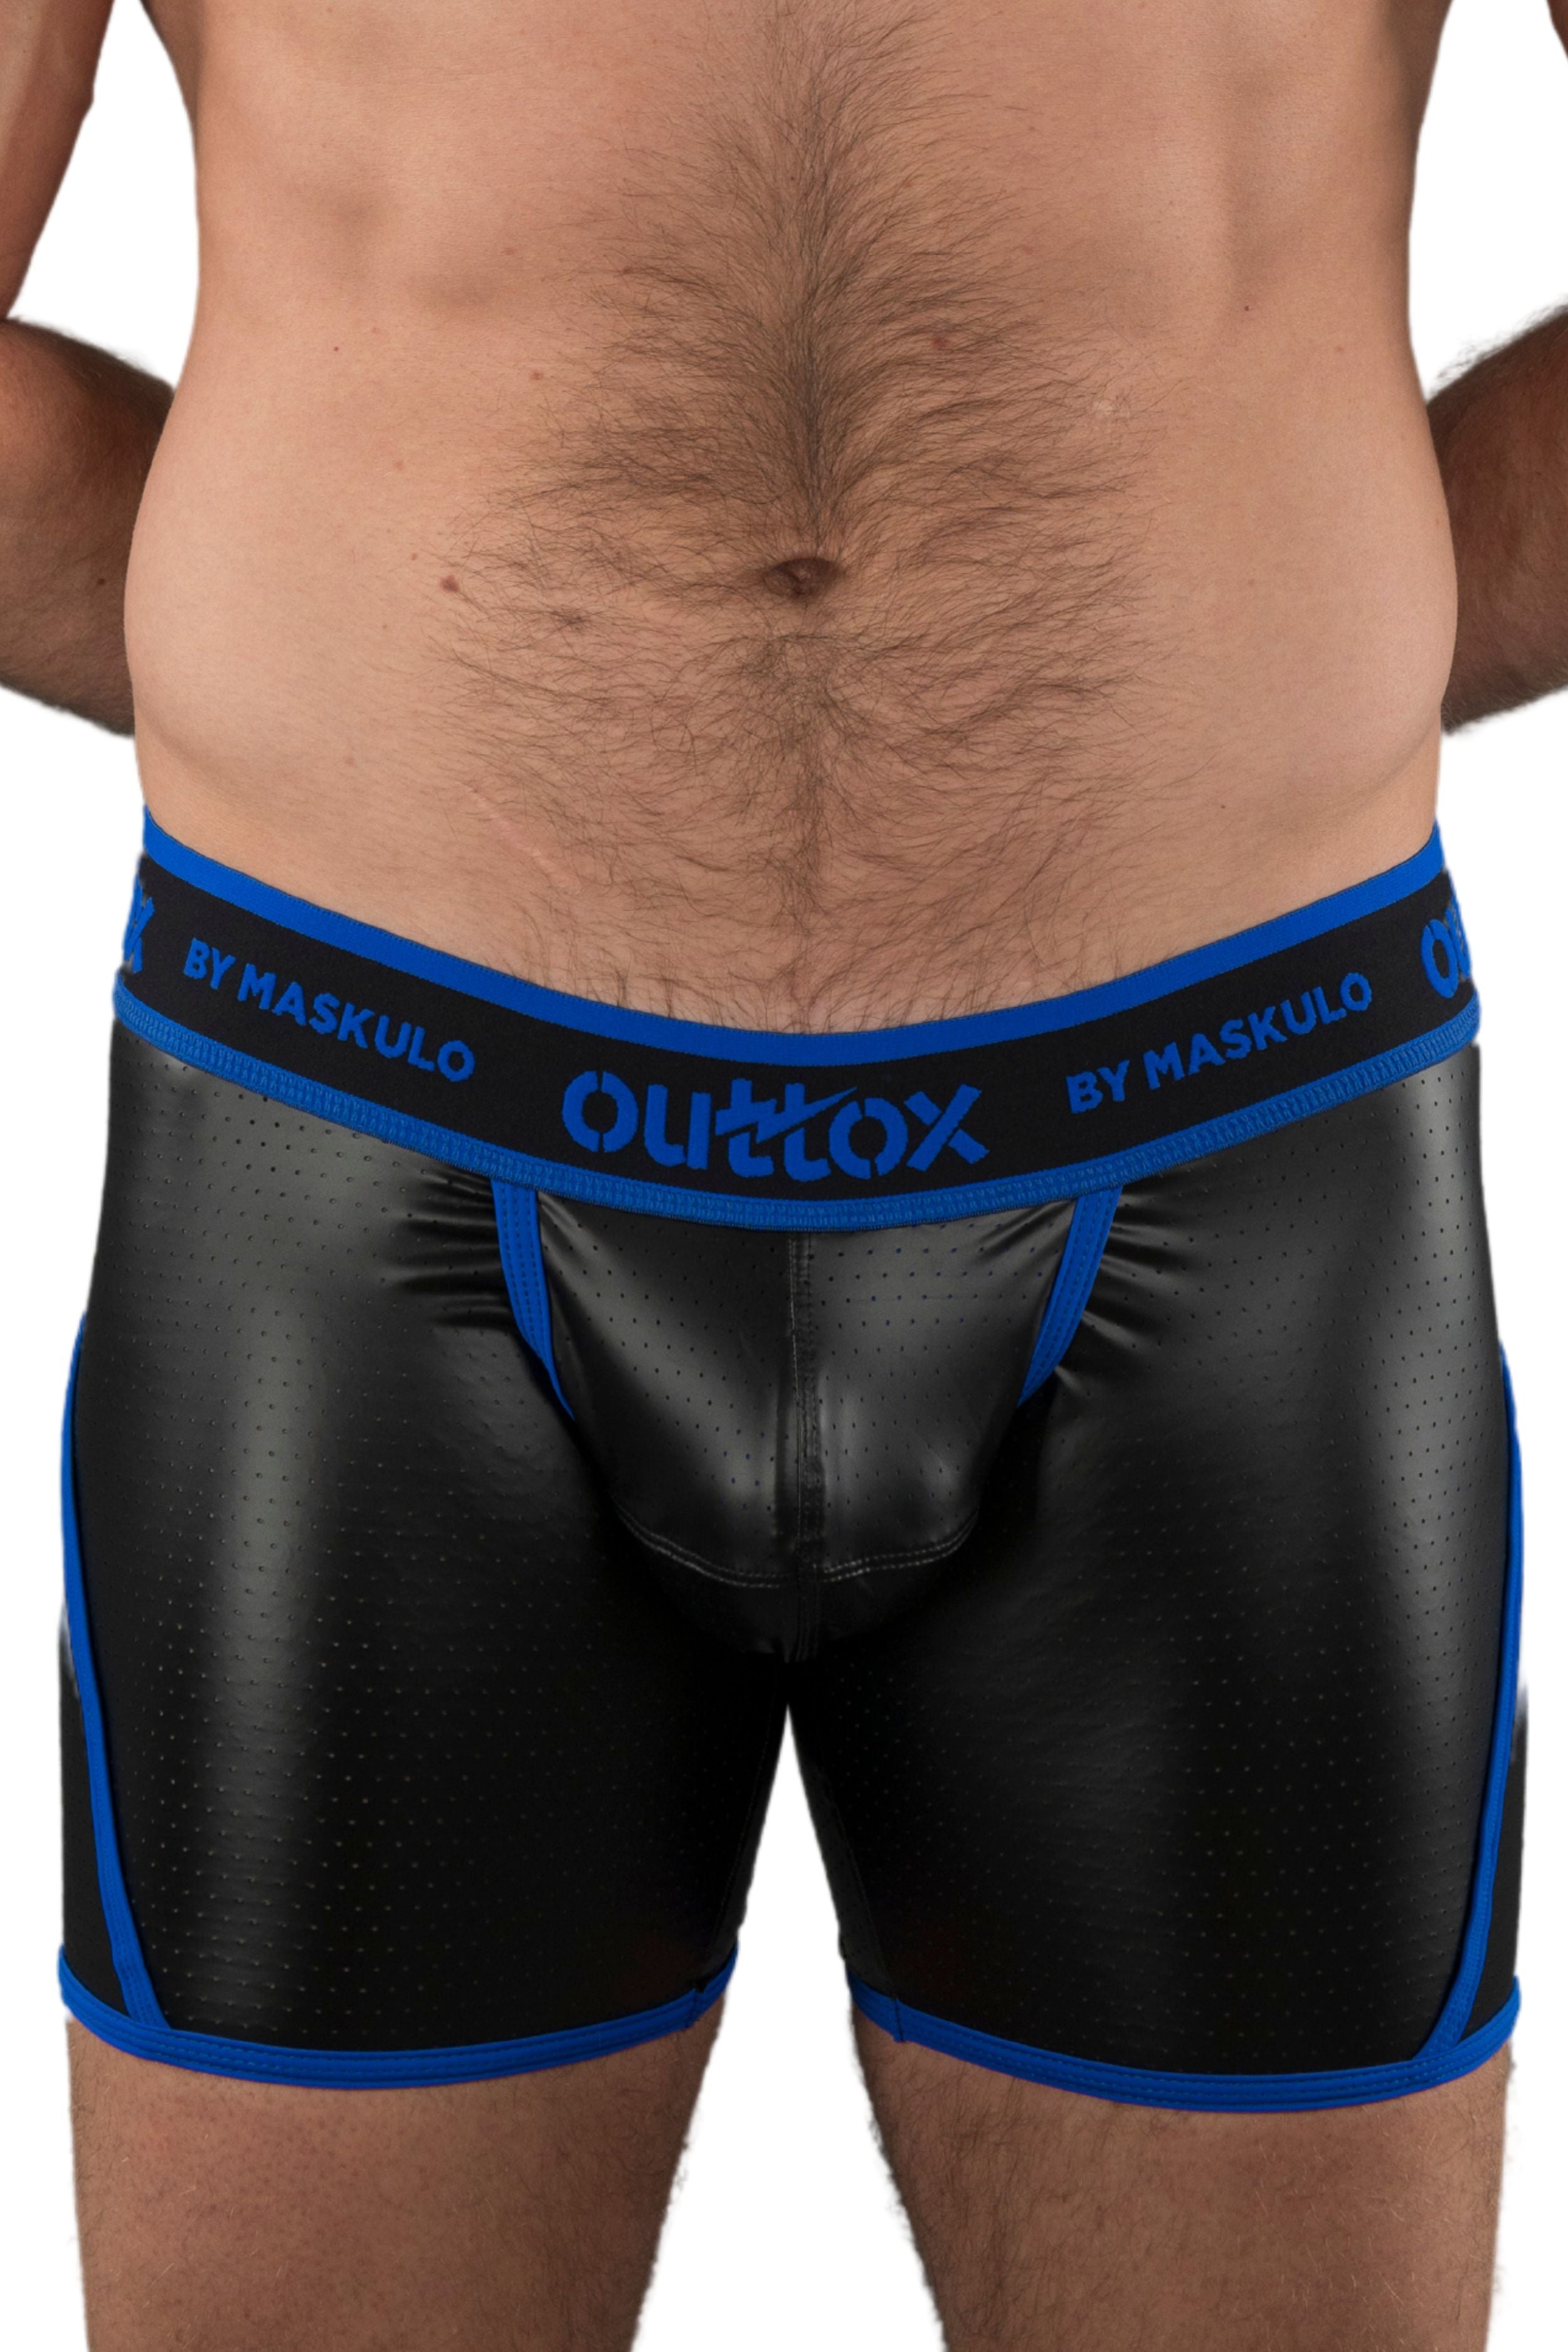 Outtox. Open Rear Shorts with Snap Codpiece. Blue